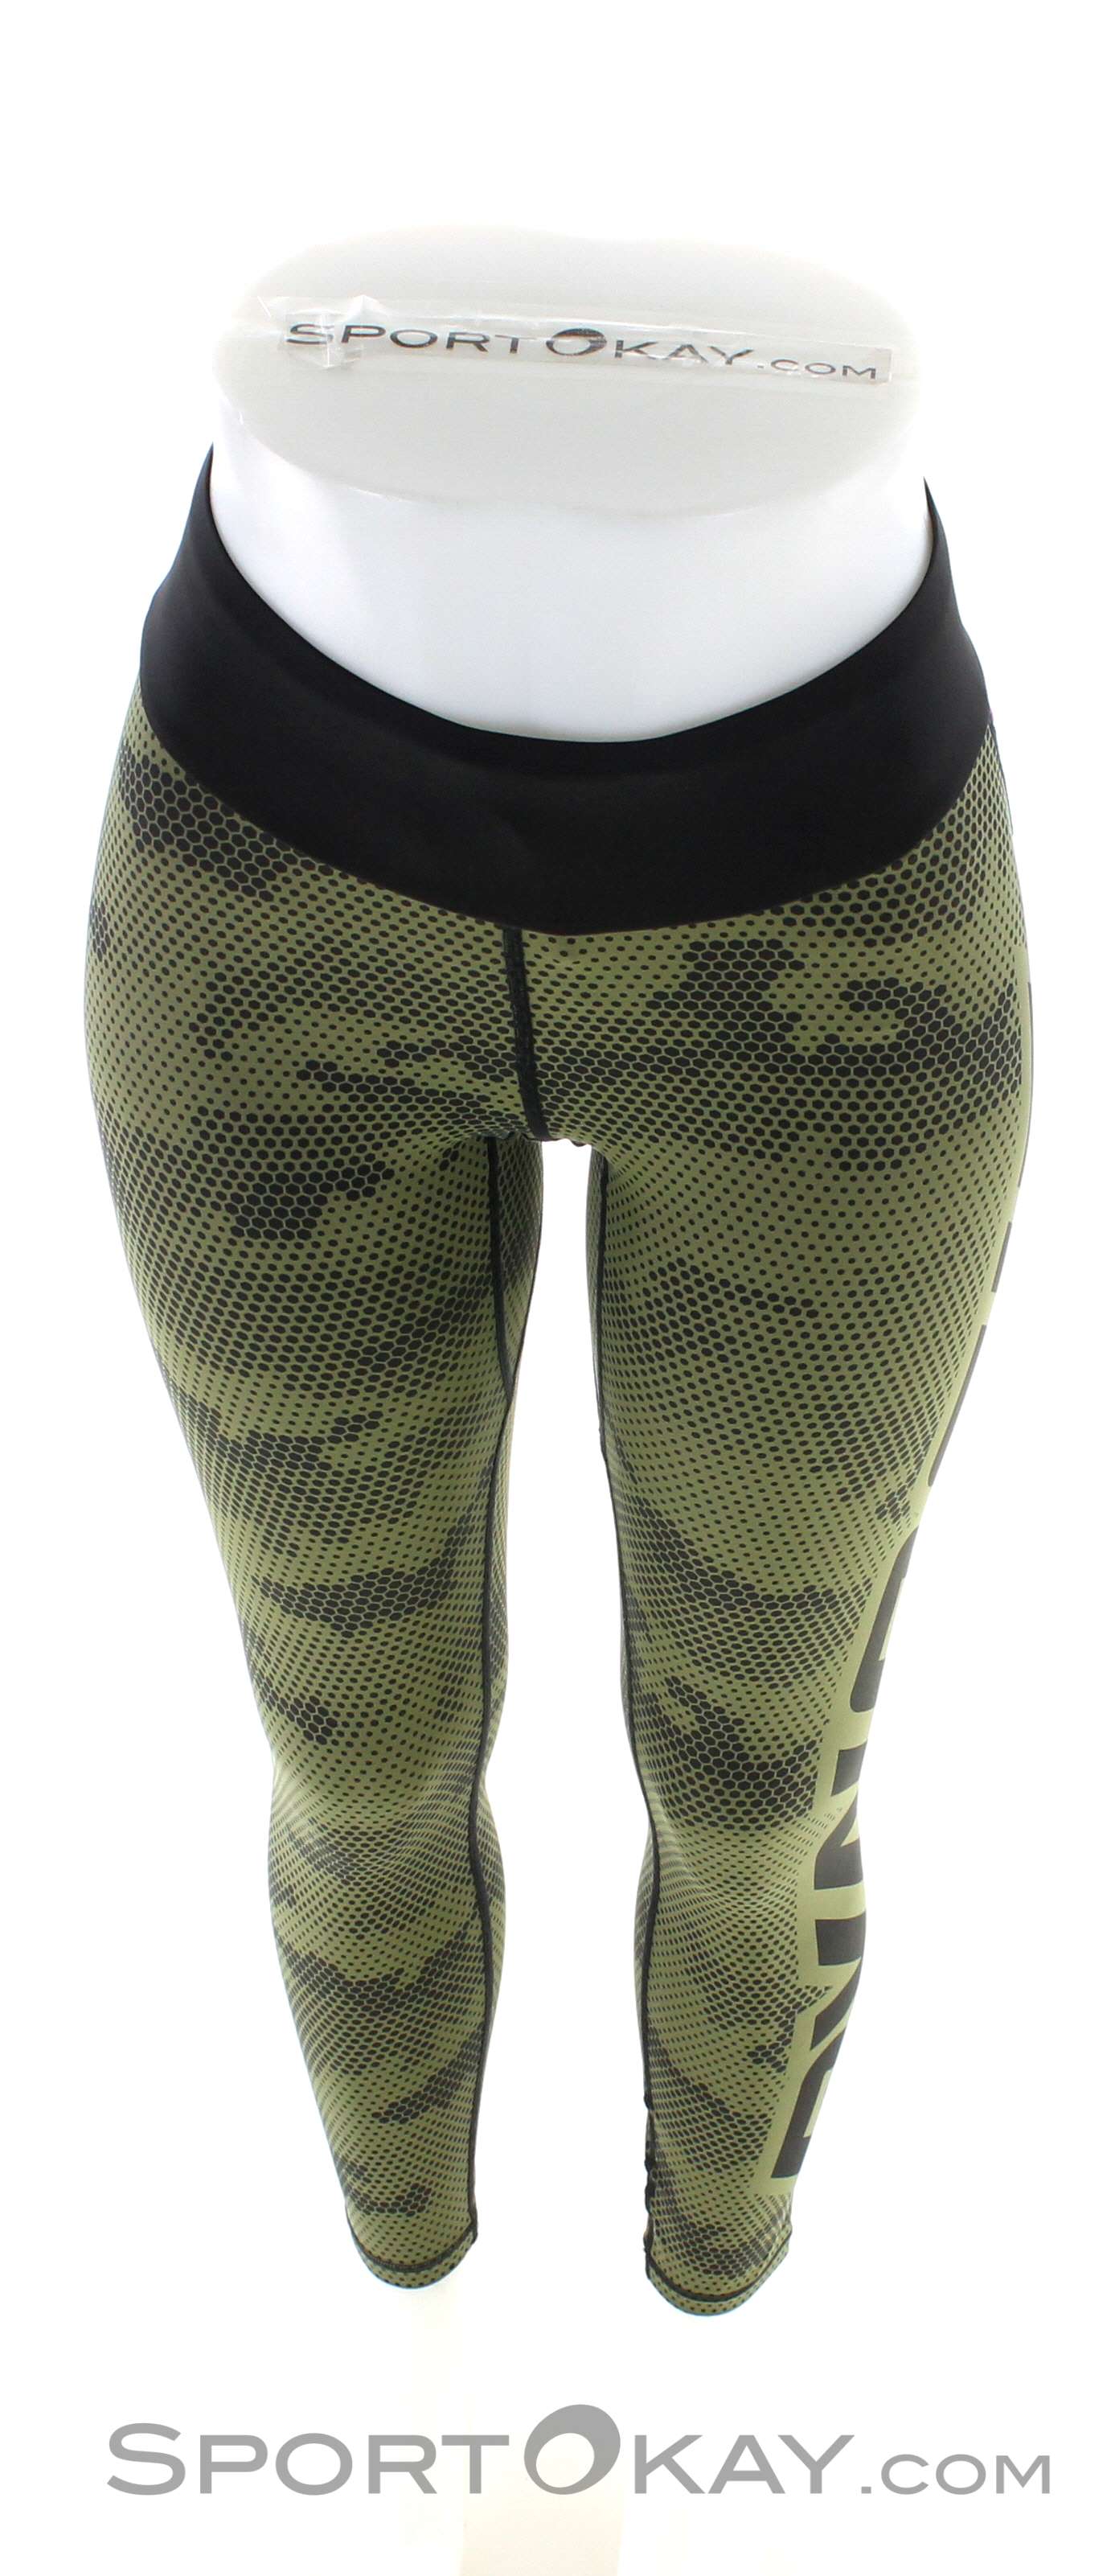 Famme Camouflage Tights - Leggings & Tights